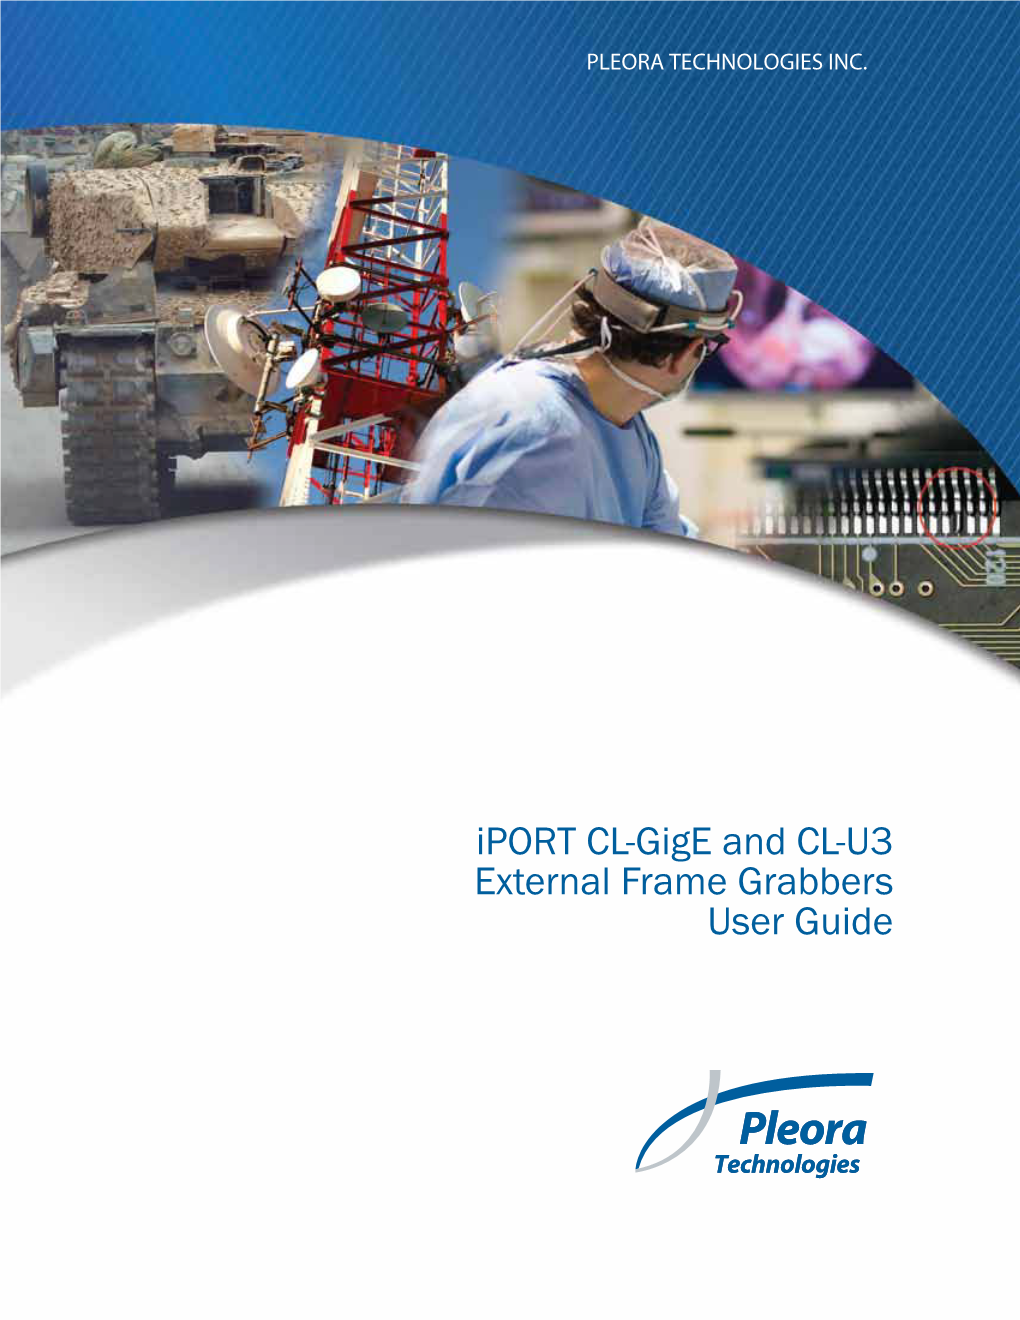 Iport CL-Gige and CL-U3 External Frame Grabbers User Guide